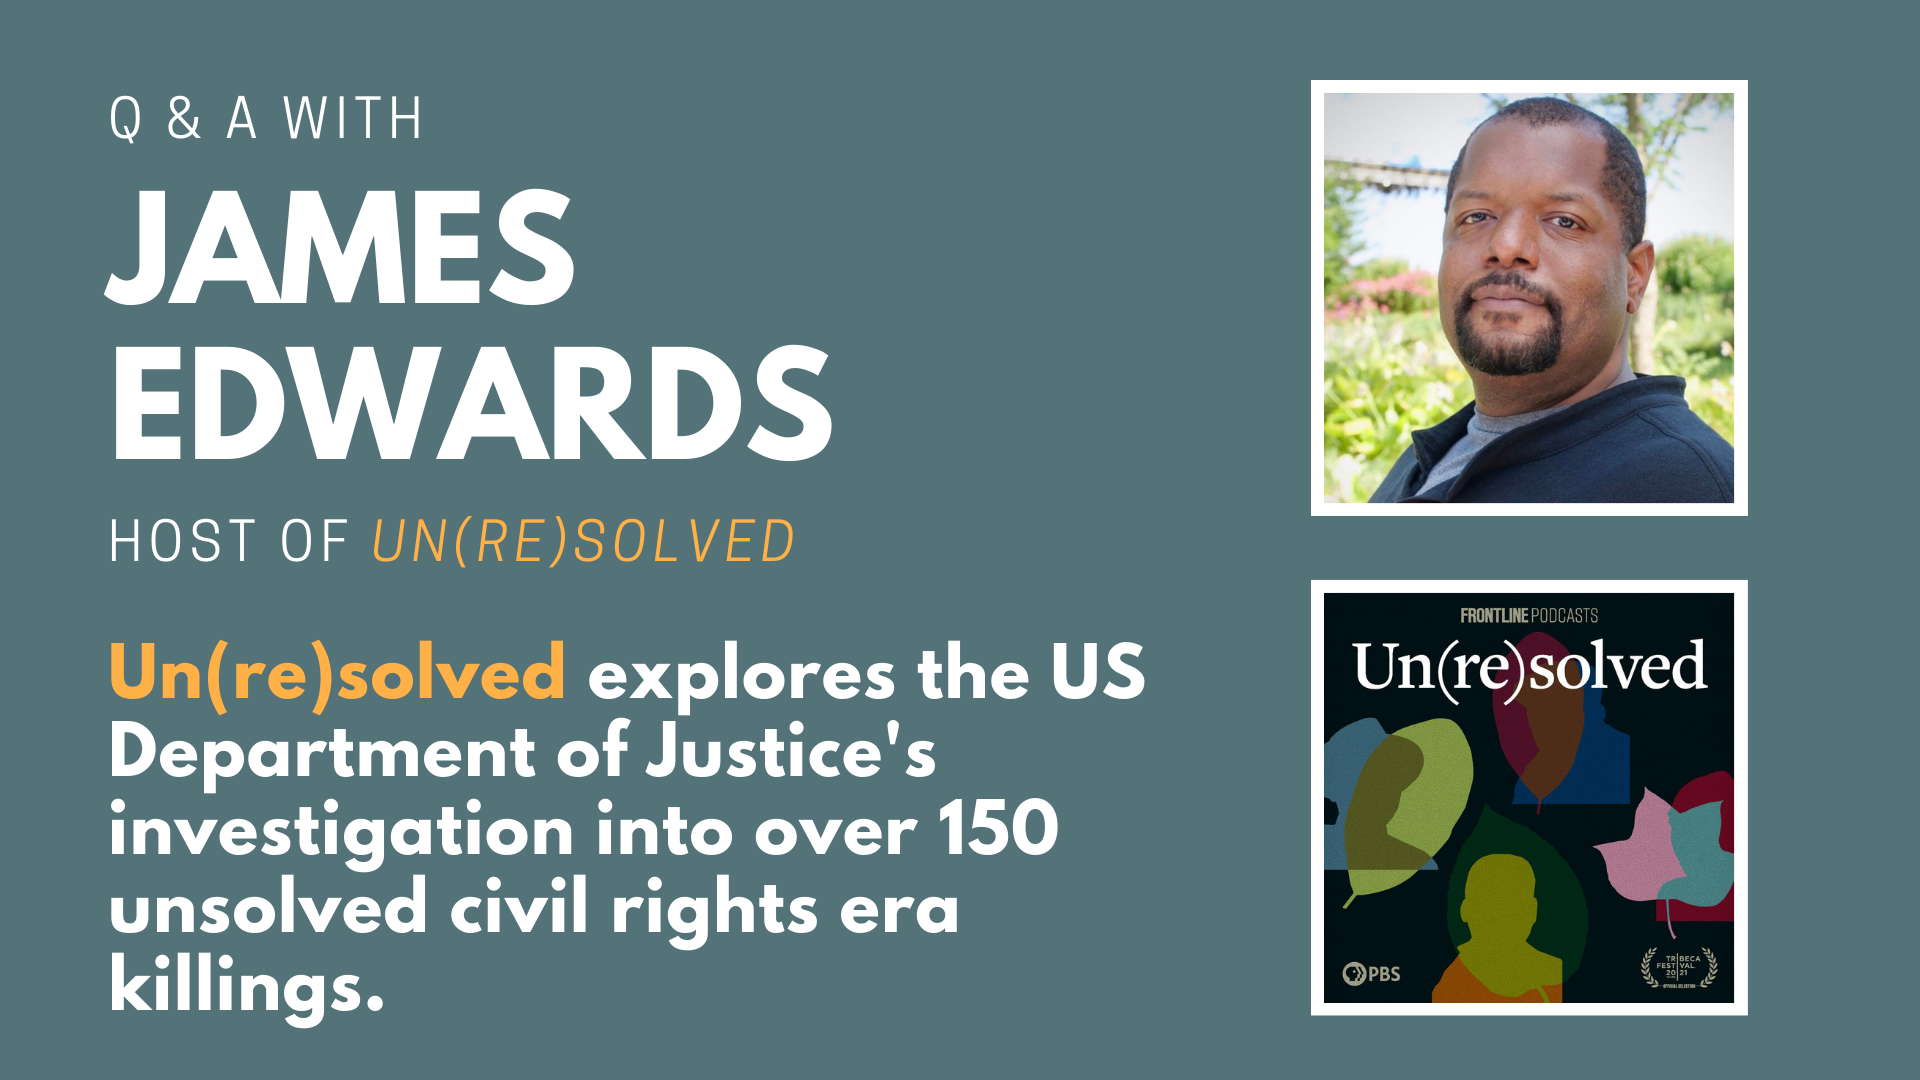 Q&A with James Edwards, host of Un(re)solved. Un(re)solved explores the US Department of Justice's investigation into over 150 unsolved civil rights era killings.